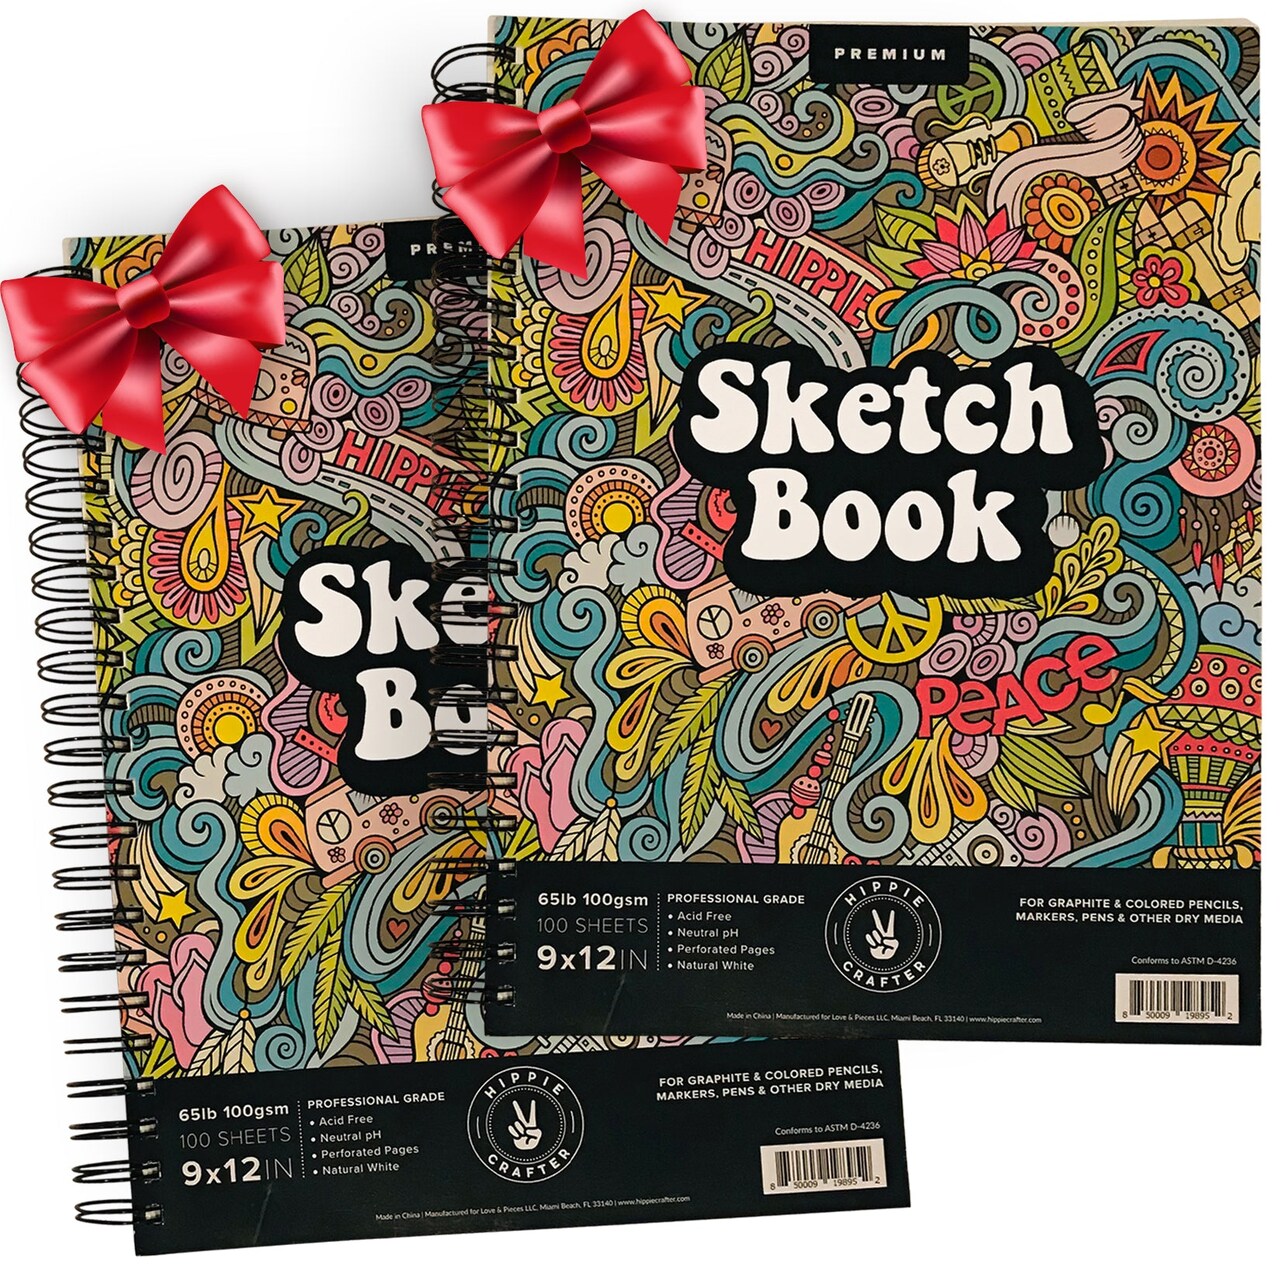 Sketch Book Pack 9 x 12 inches Pad, 2 Pack 100 Sheets Spiral Bound  65lb/100gsm, Acid Free Sketchbook Art Professional Artist Sketch Book for  Drawing Painting Writing Paper Adults Kids Beginners